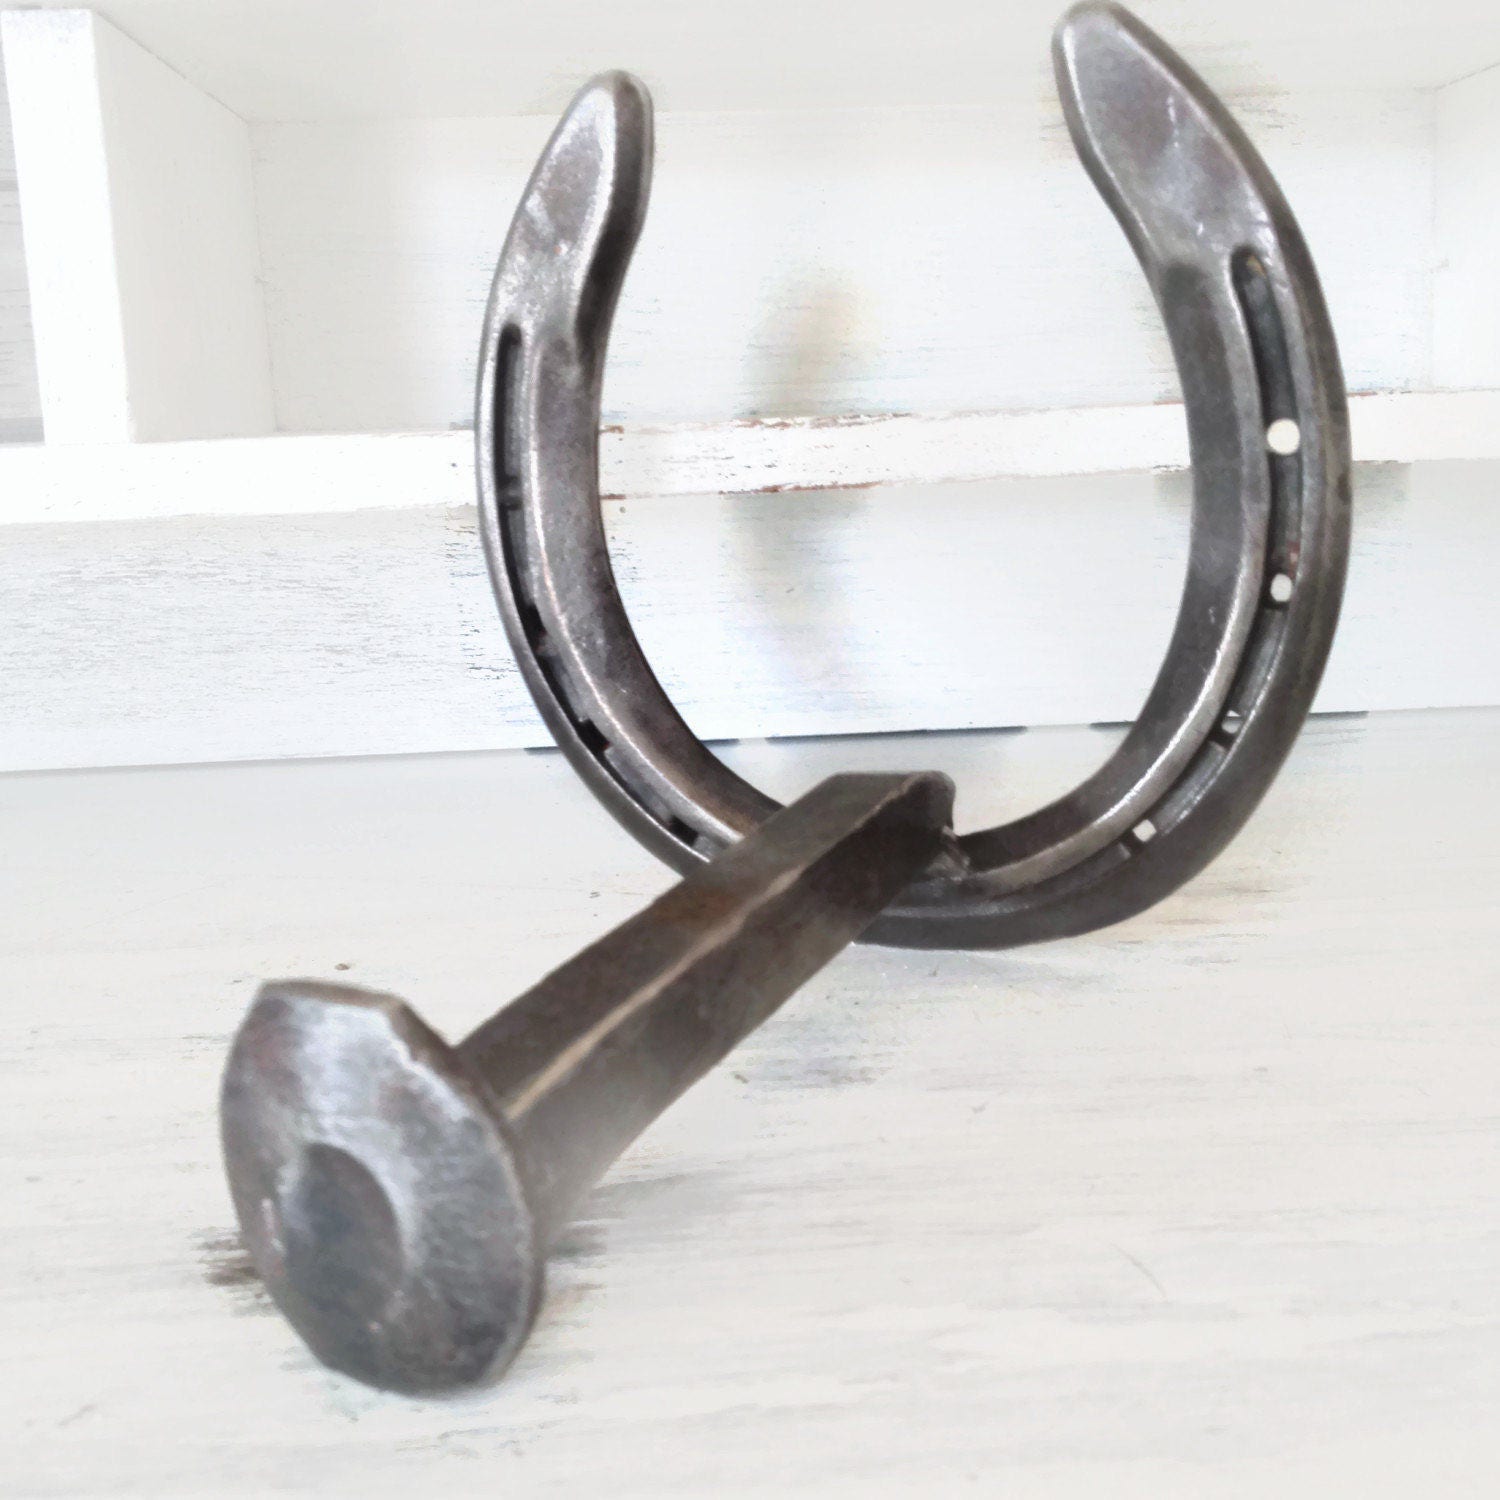 Horseshoe Railroad-Spike Toilet Paper Holder - The Heritage Forge